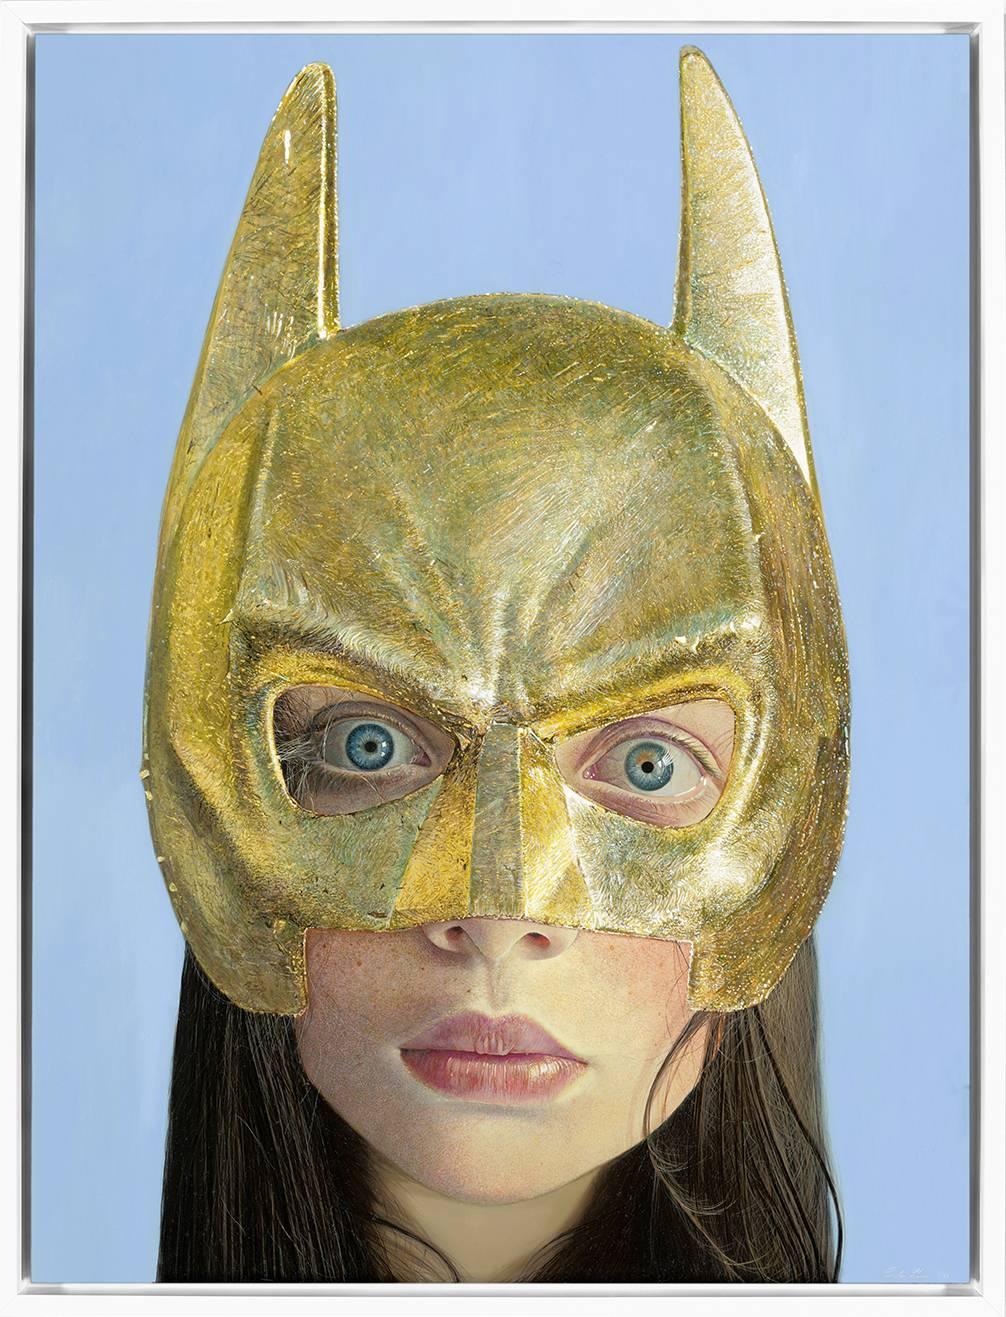 Girl With The Golden Mask - Framed Fine Art Limited Edition of 69 - Print by Gordon Harris